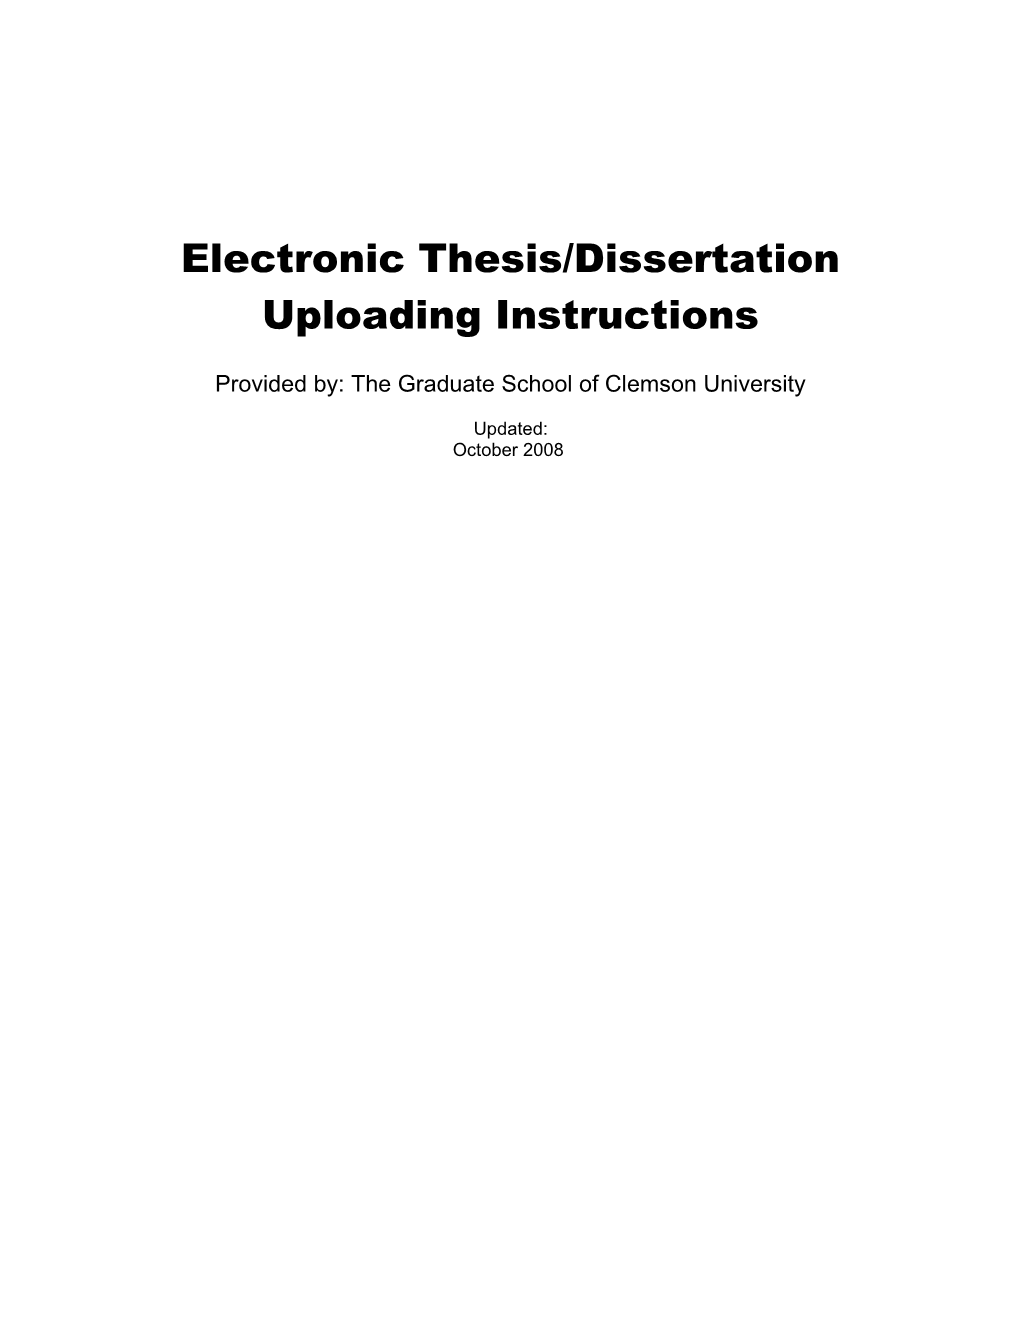 Guide to Electronic Thesis/Dissertation Submission